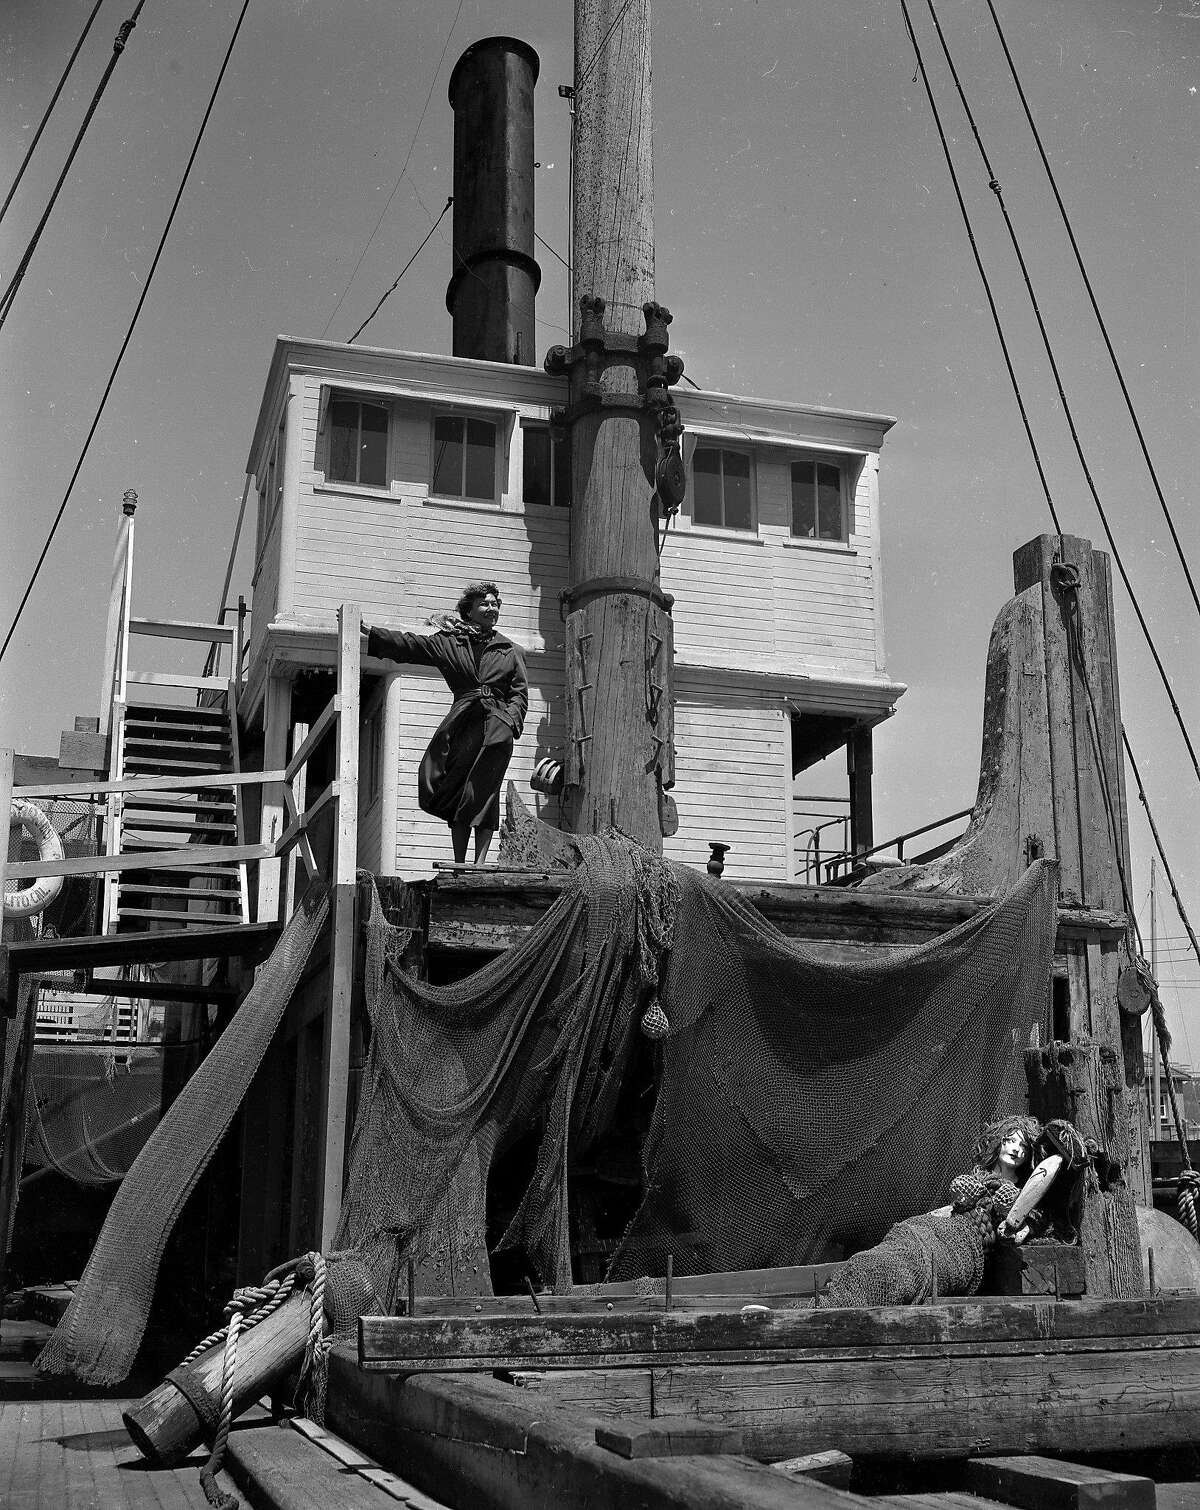 Loyola Fountaine creates modern jewelry, and live on the the Lassen, an old lumber schooner now concerted to house four artists' workshops. It has sat on this spot for 36 years. Photo ran 08/12/1951